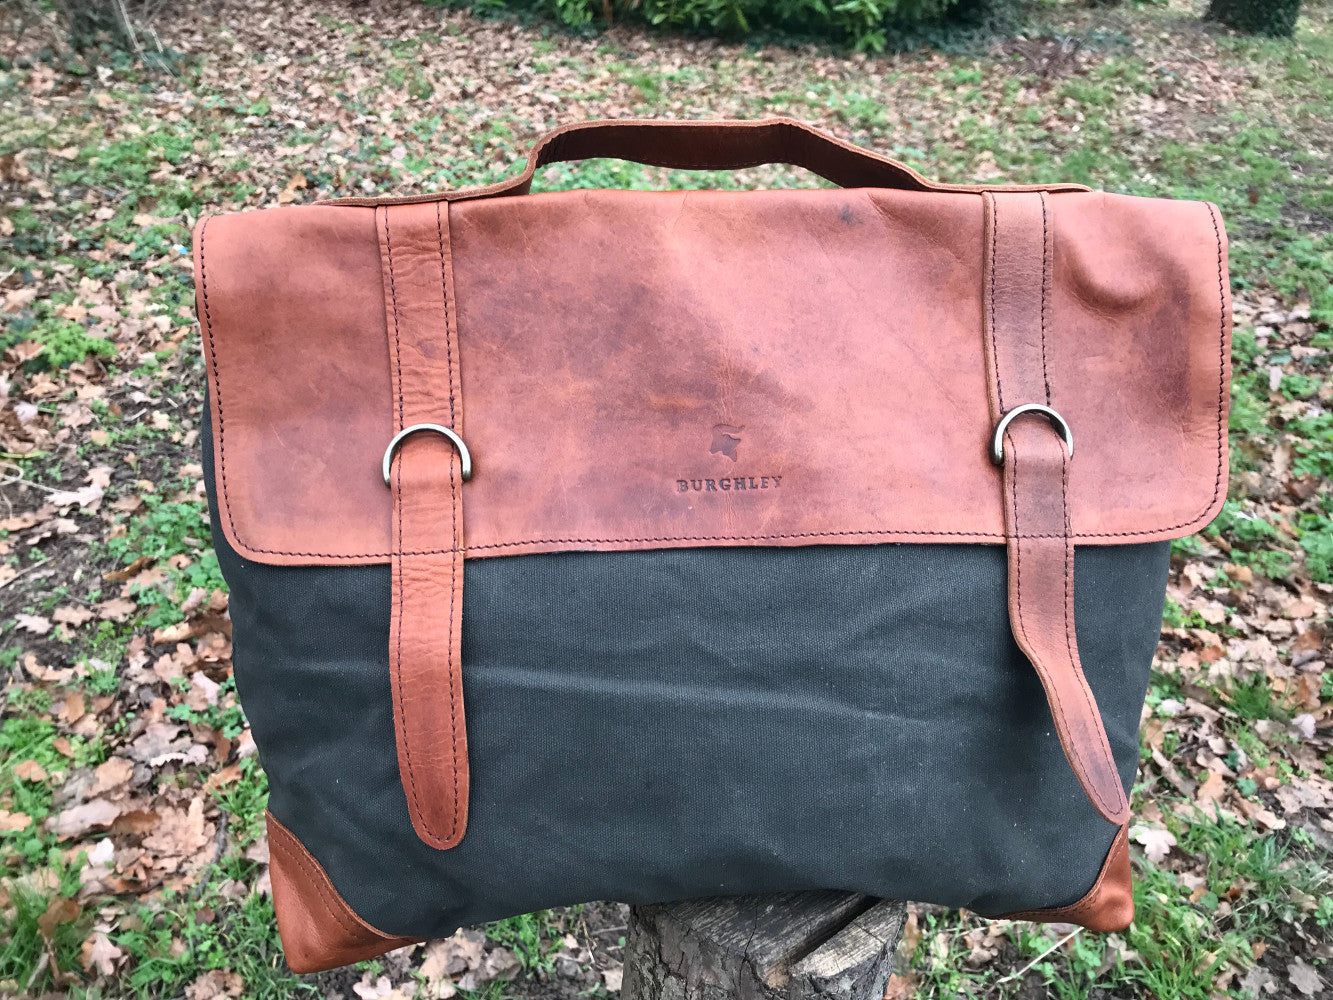 The Granby vintage leather casual briefcase by Burghley Bags